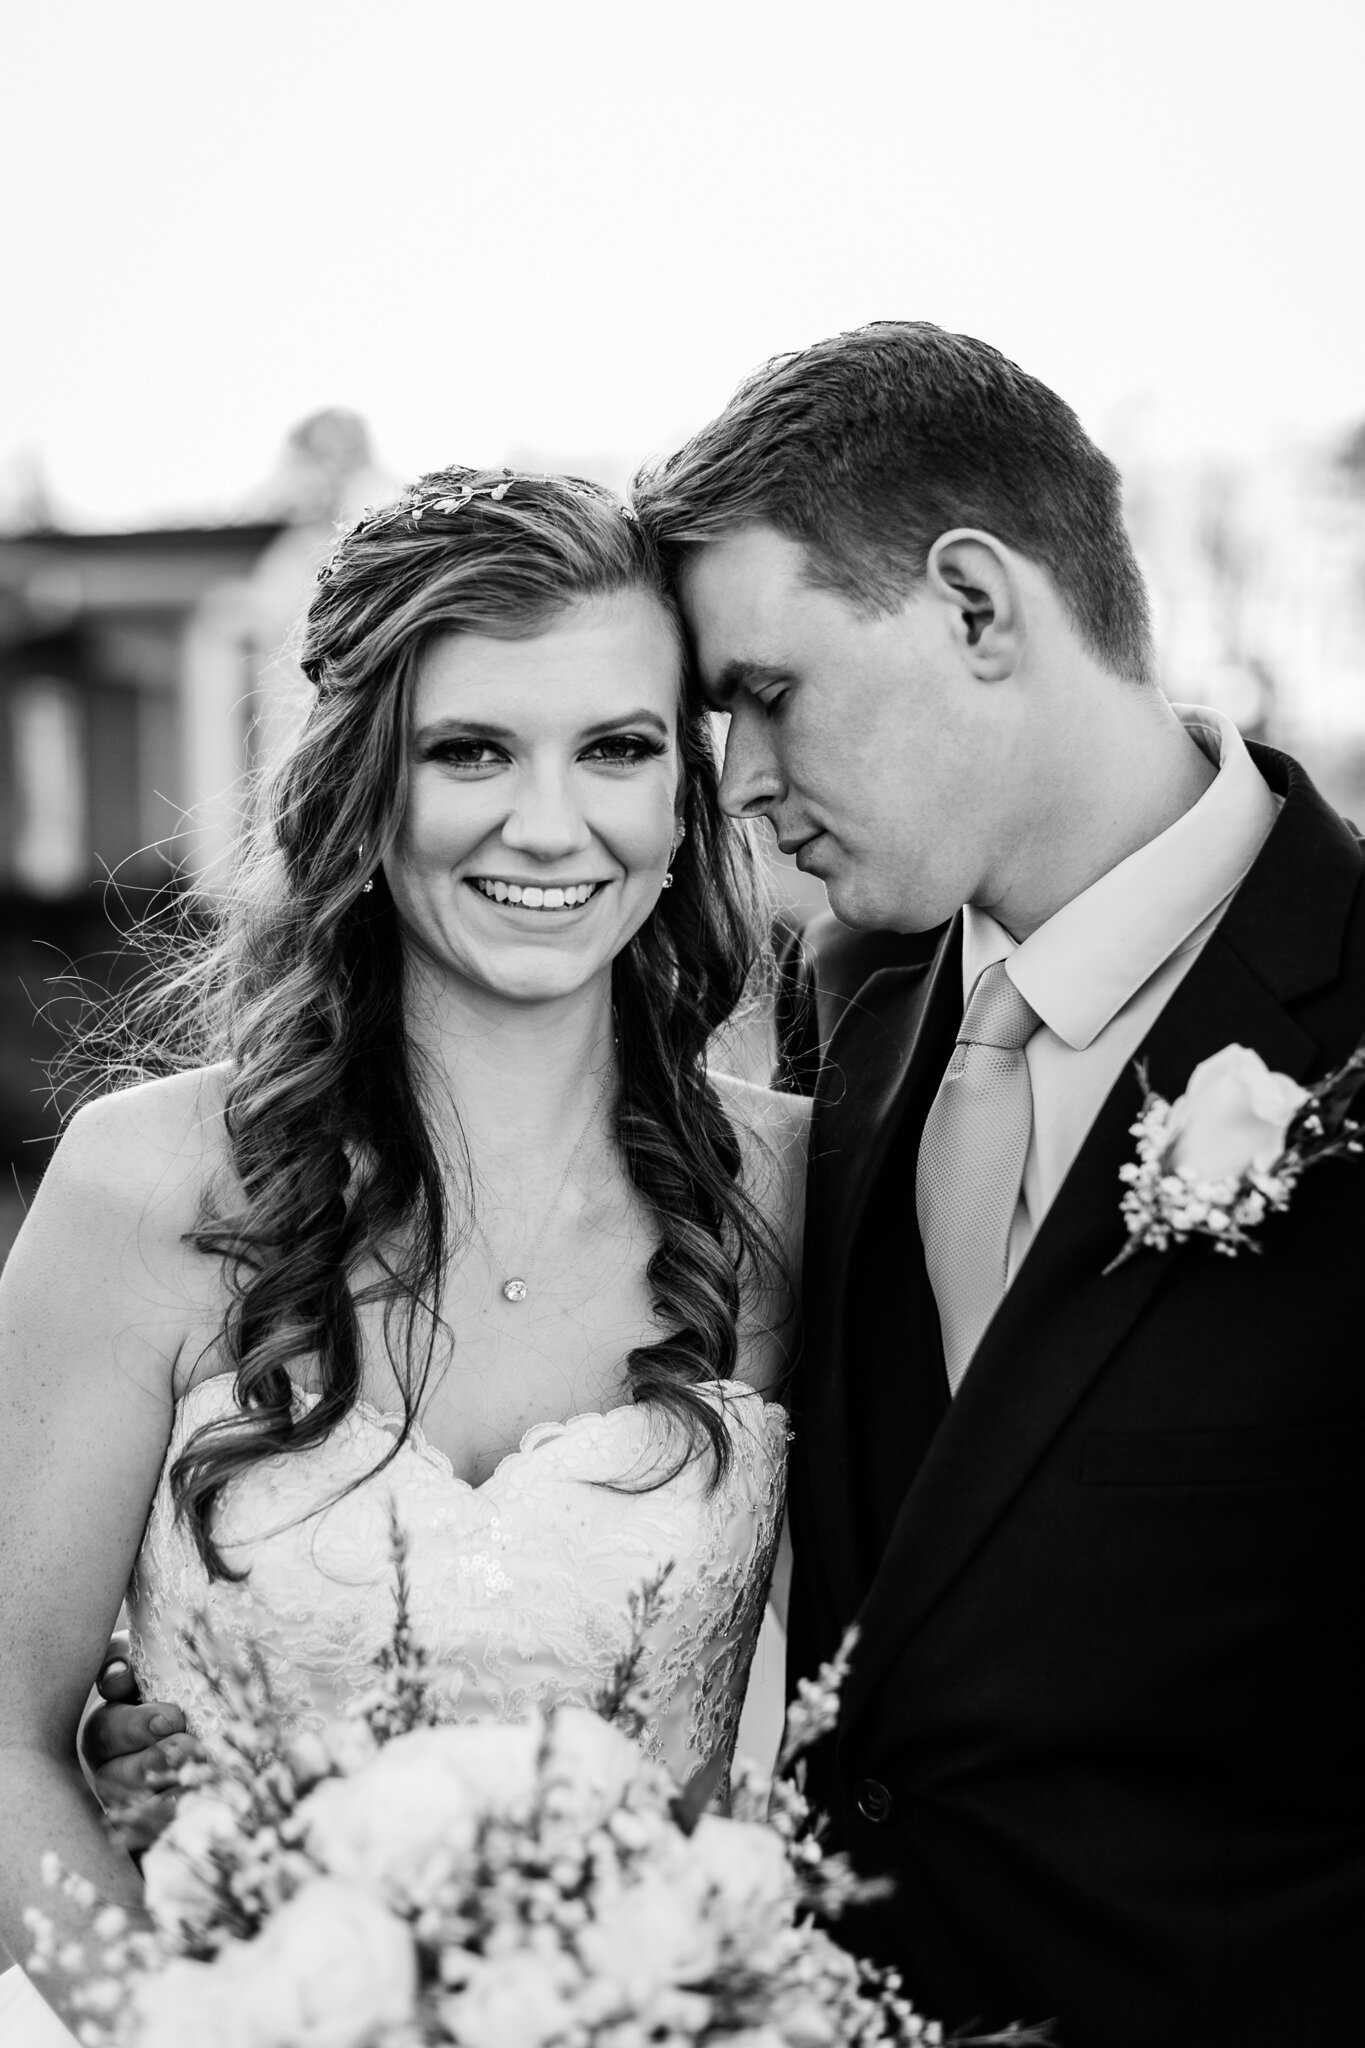 Durham Wedding Photographer | By G. Lin Photography | Black and white portrait of bride and groom